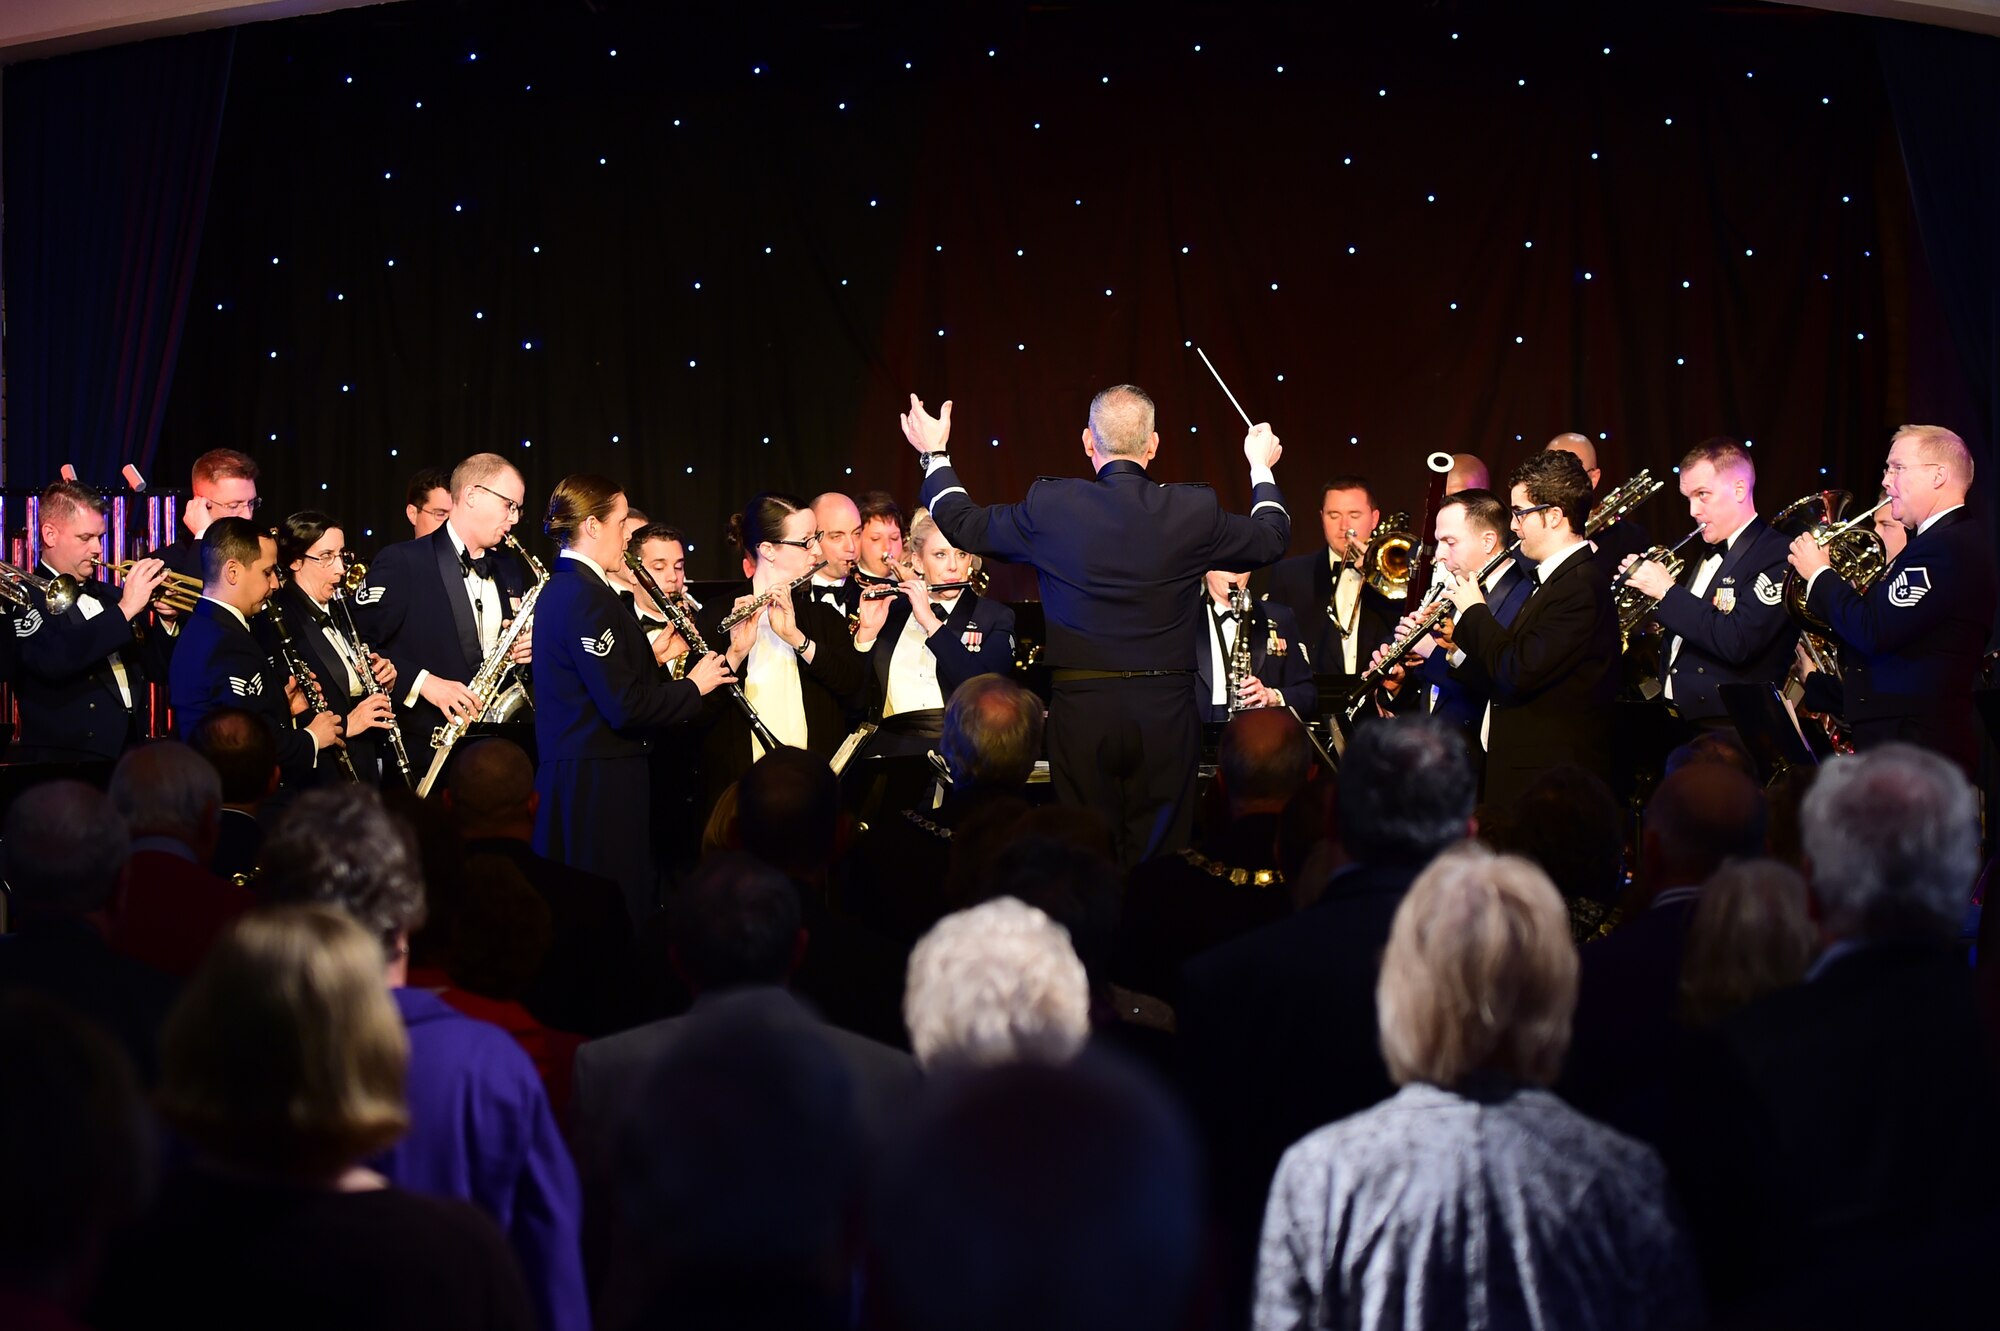 The U.S. Air Forces in Europe Concert band of nearly 40 members plays a holiday celebration at Burgess Hall in St. Ives, Cambridgeshire, England, Dec. 18, 2014. The band played songs ranging from “O Holy Night” to “Jingle Bells” as a way to say thank you to the community members who support USAFE installations.  (U.S. Air Force photo by Tech. Sgt. Chrissy Best)